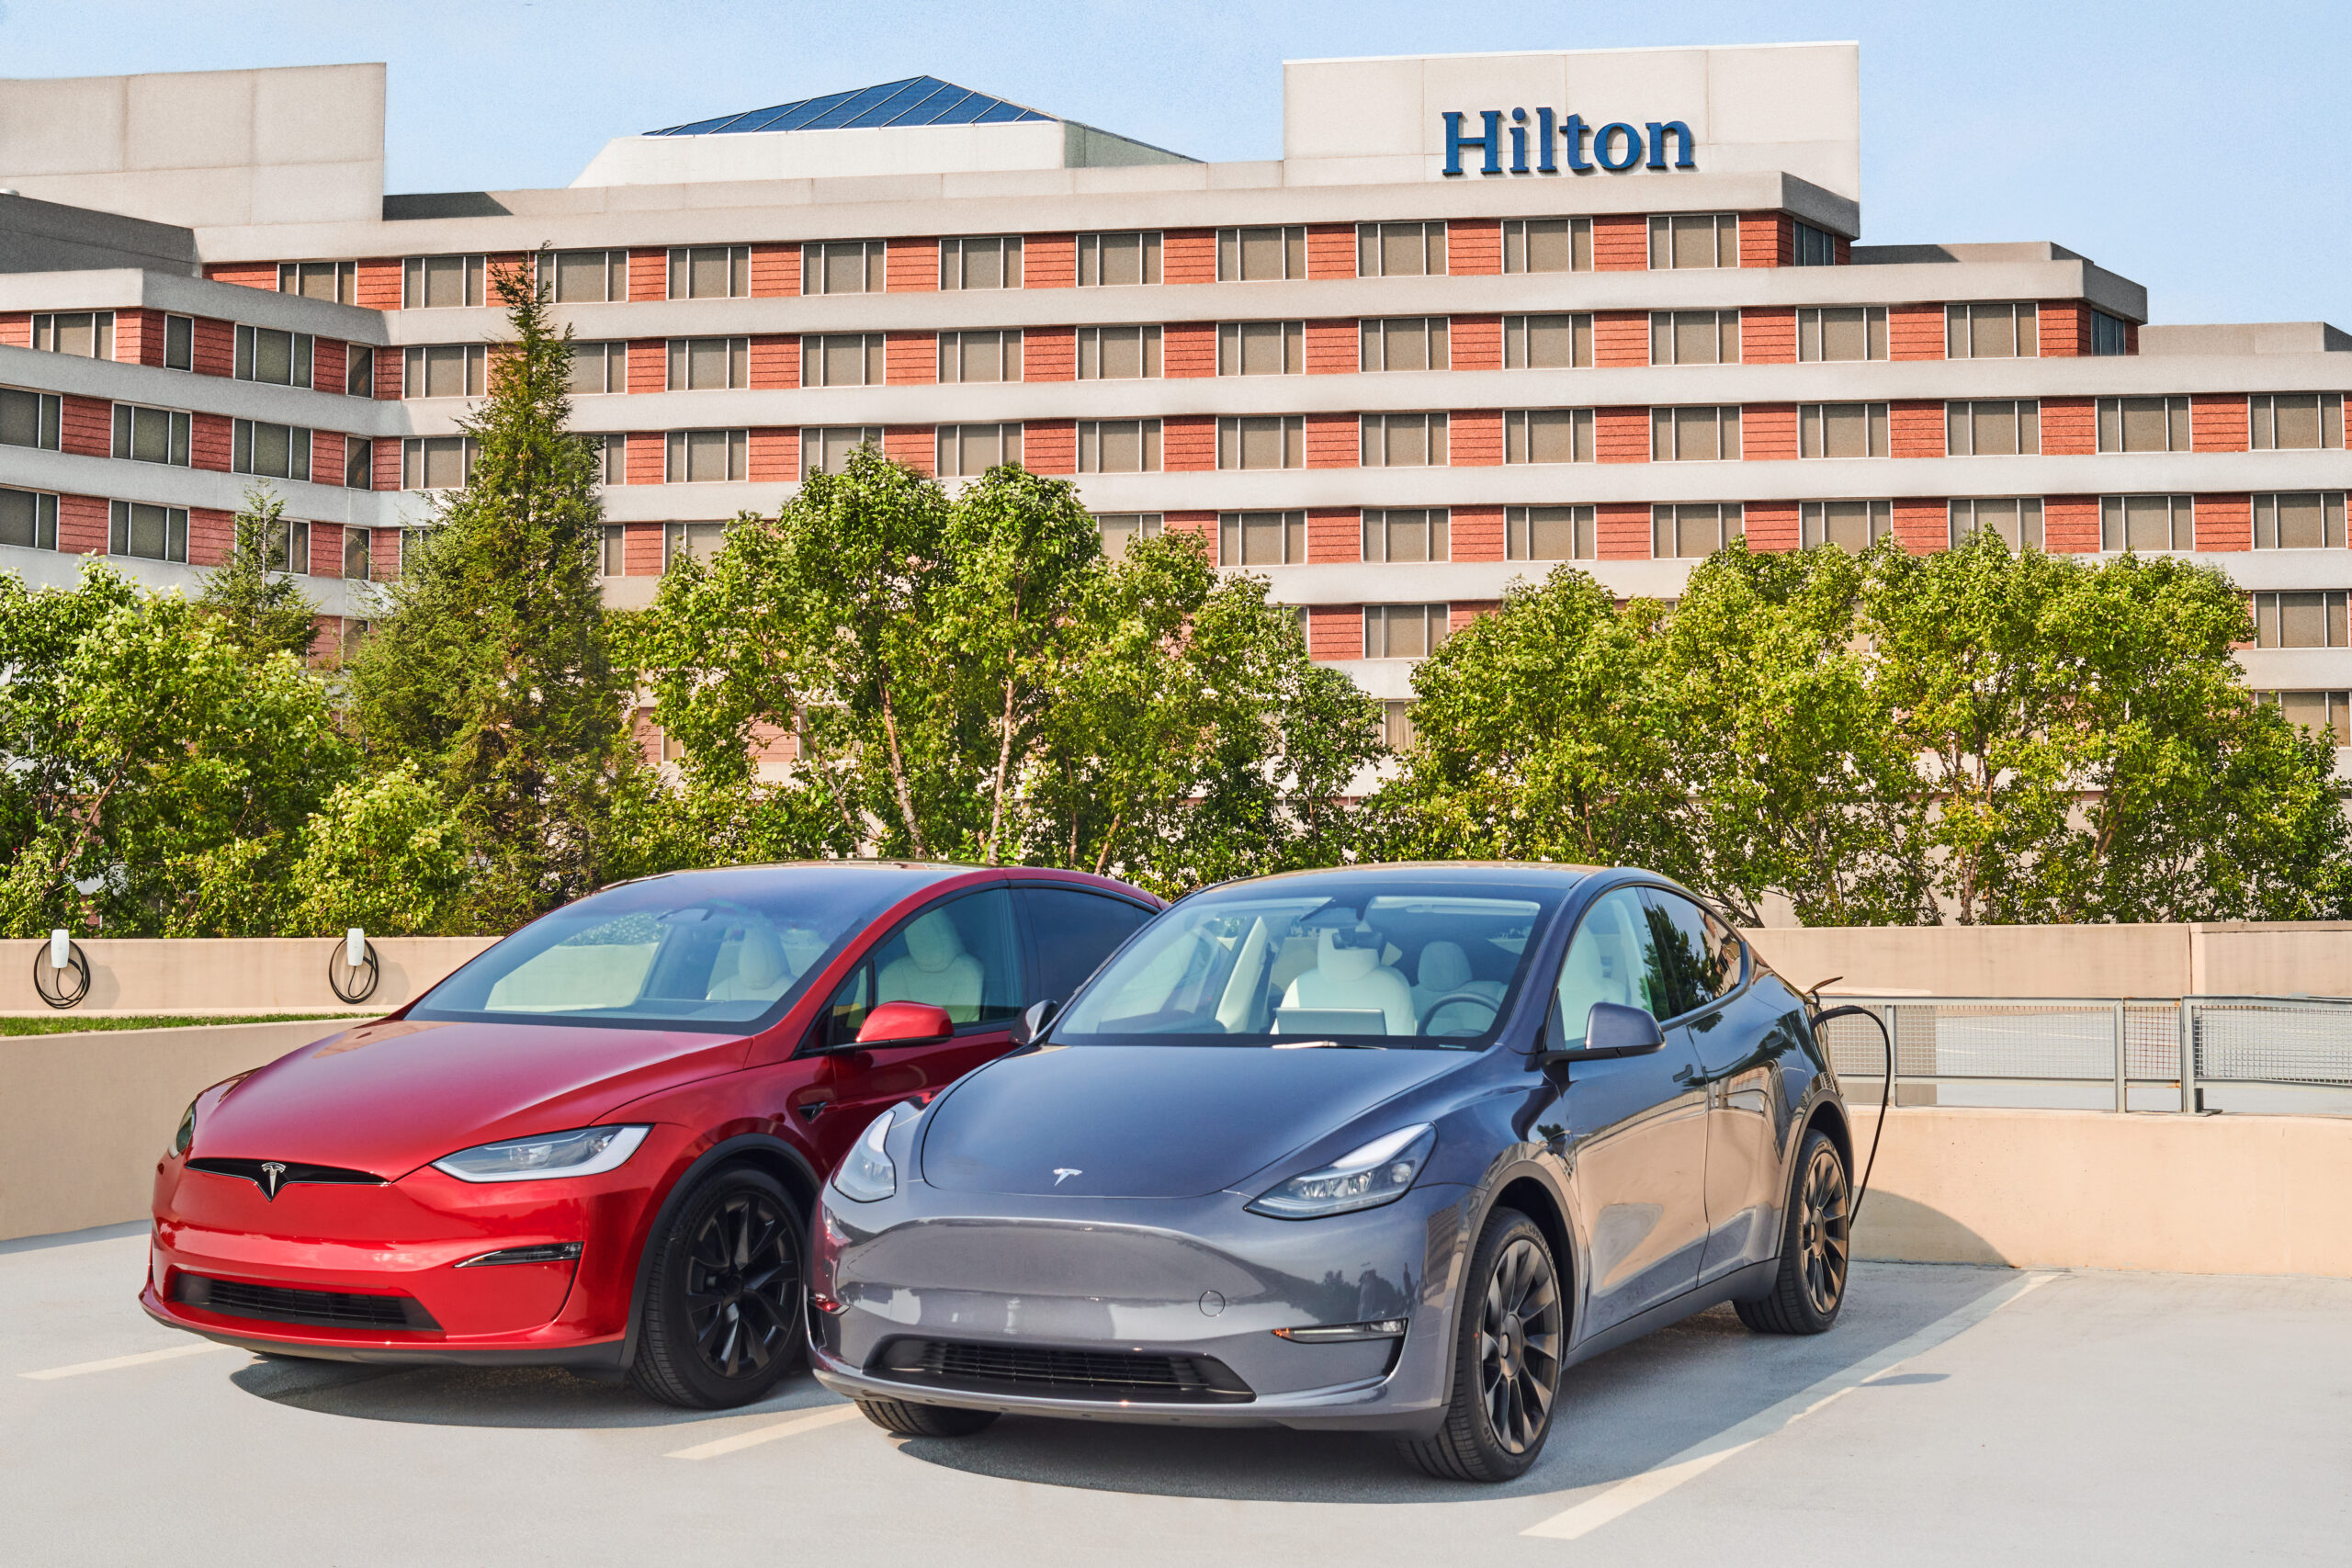 Photo of: Hilton Hotels With EV Charging // Hilton